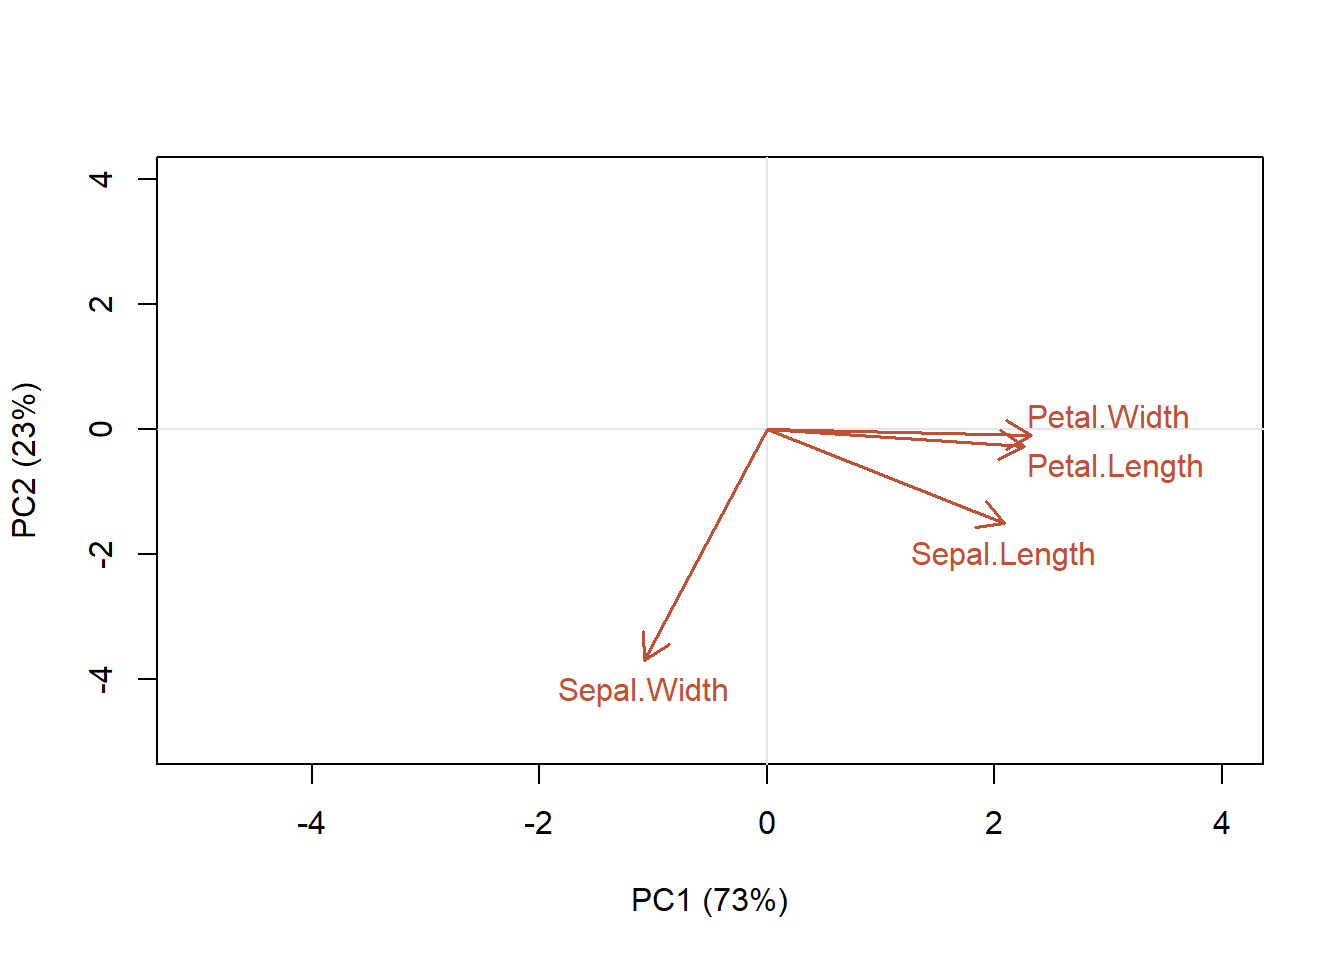 A plot with x-axis labelled 'PC1 (73%)' and y-axis labelled 'PC2 (23%)'. Four purple arrowed lines labelled 'Sepal.Width', 'Sepal.Length', , 'Petal.Width' and 'Petal.Length' emerge from the center point in various directions